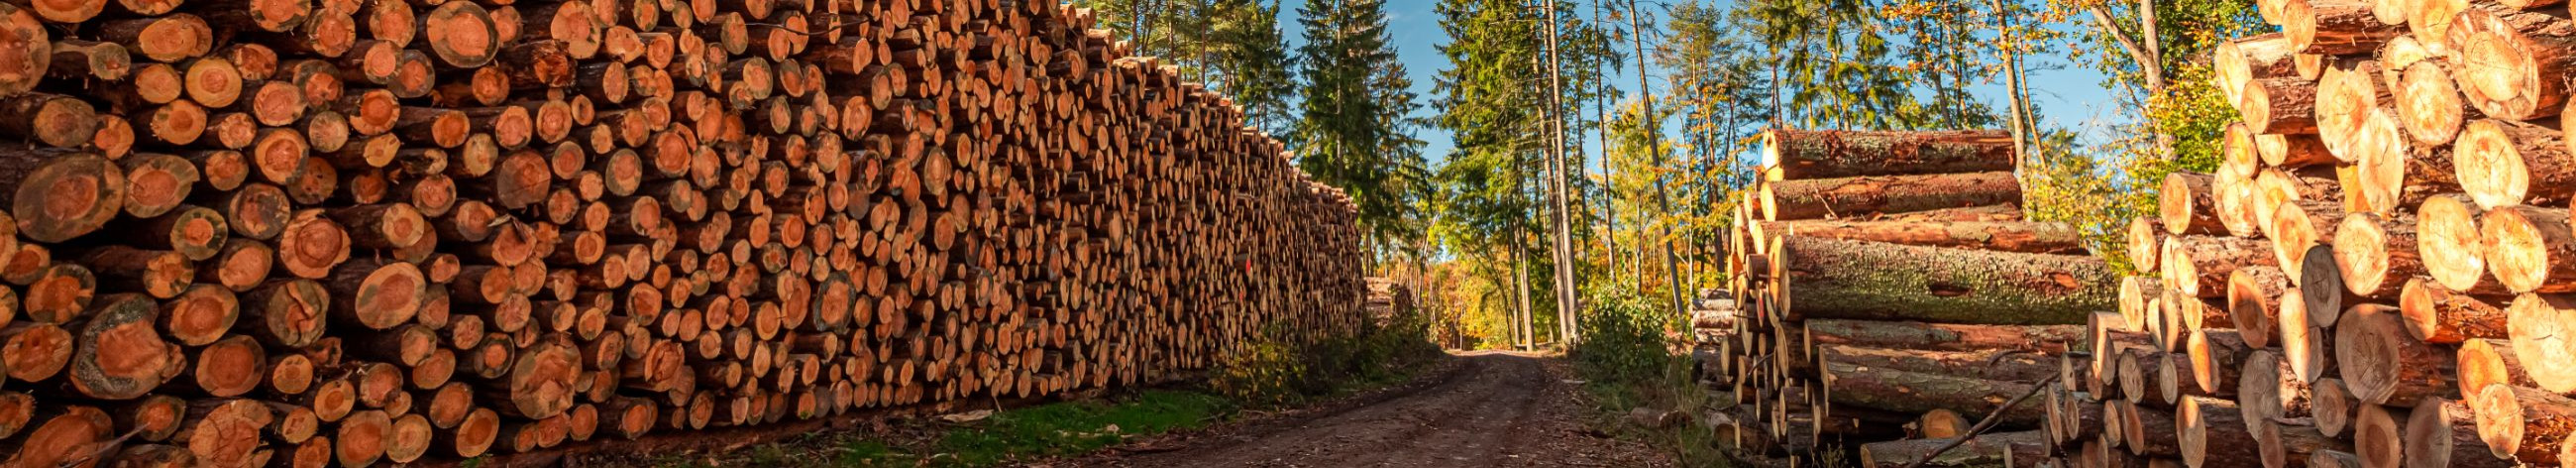 We specialize in comprehensive forestry services including logging, timber concentration, and land clearing.